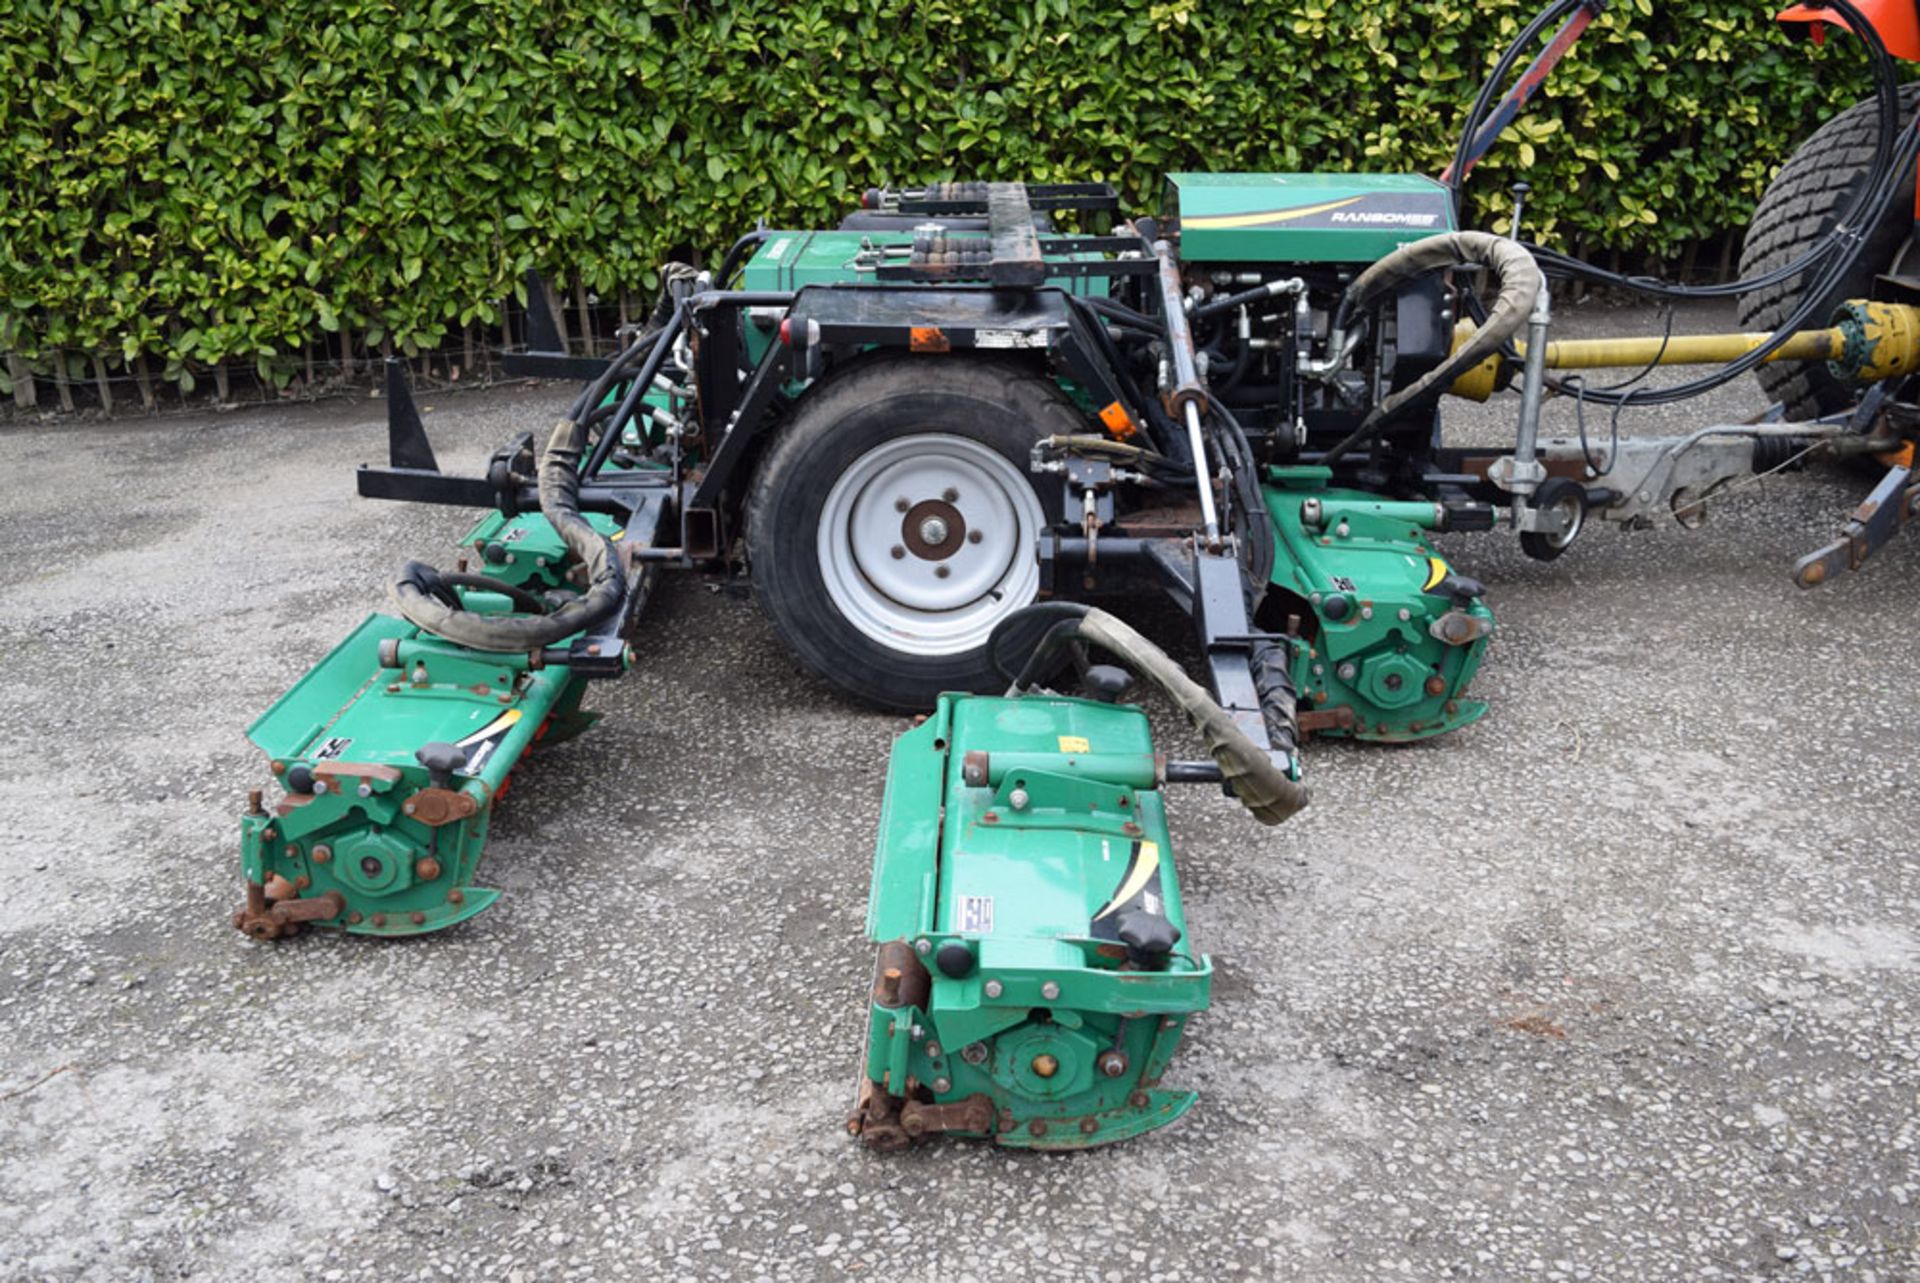 2009 Ransomes TG4650 Tractor Mount Trailed Cylinder Gang Mower - Image 9 of 13